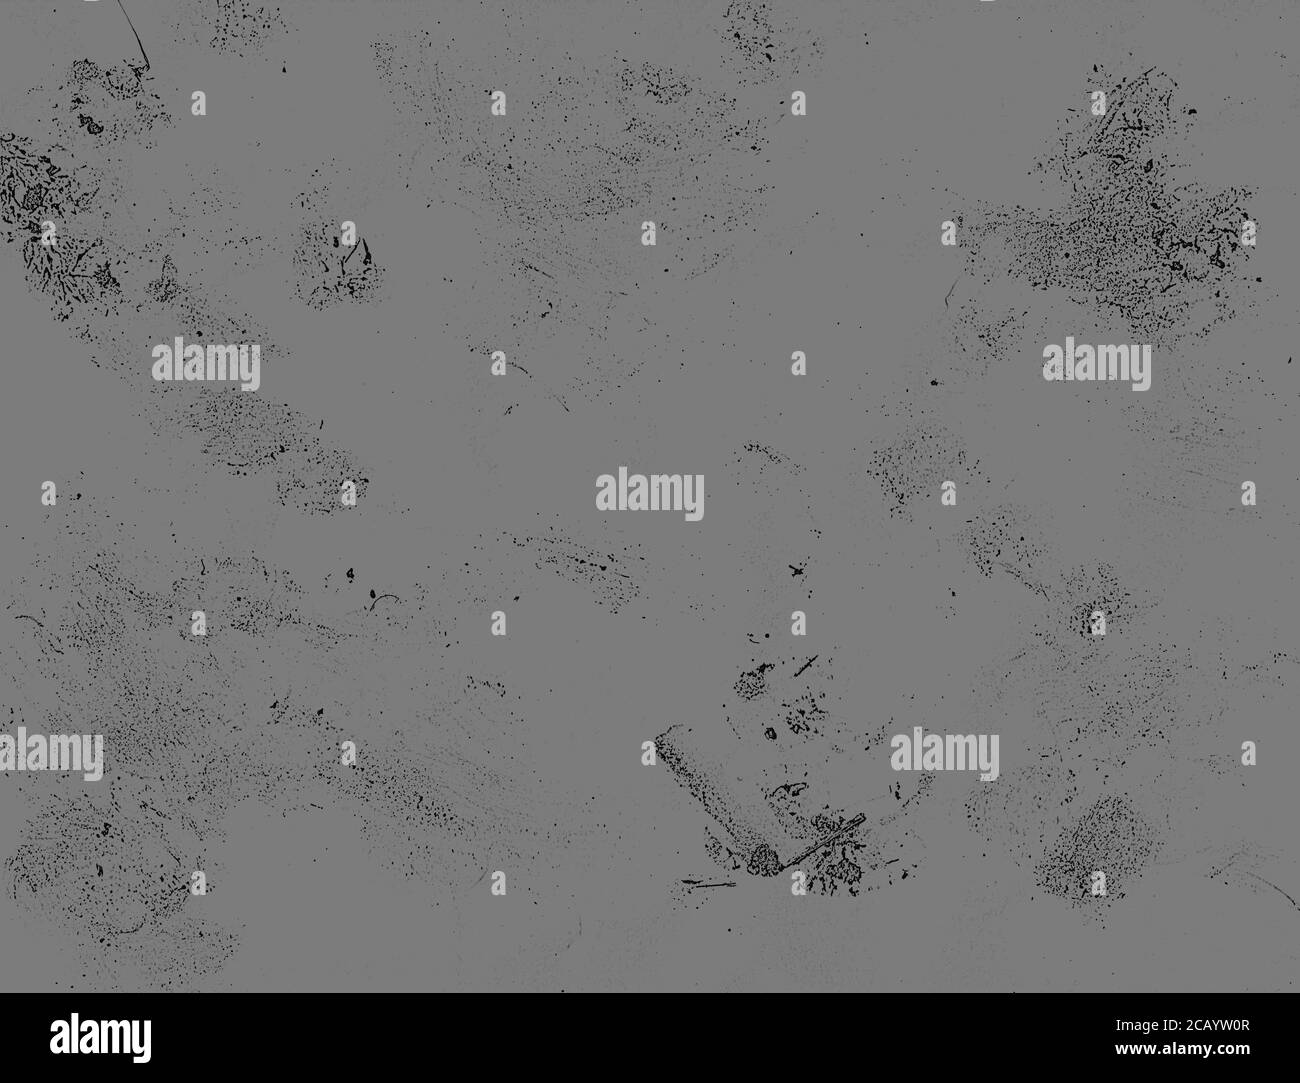 Gritty Grimy Grunge Wallpaper Graphic Space For Added Text Copy Concept For Urban Decay Poverty Inner City Aesthetic Stock Photo Alamy